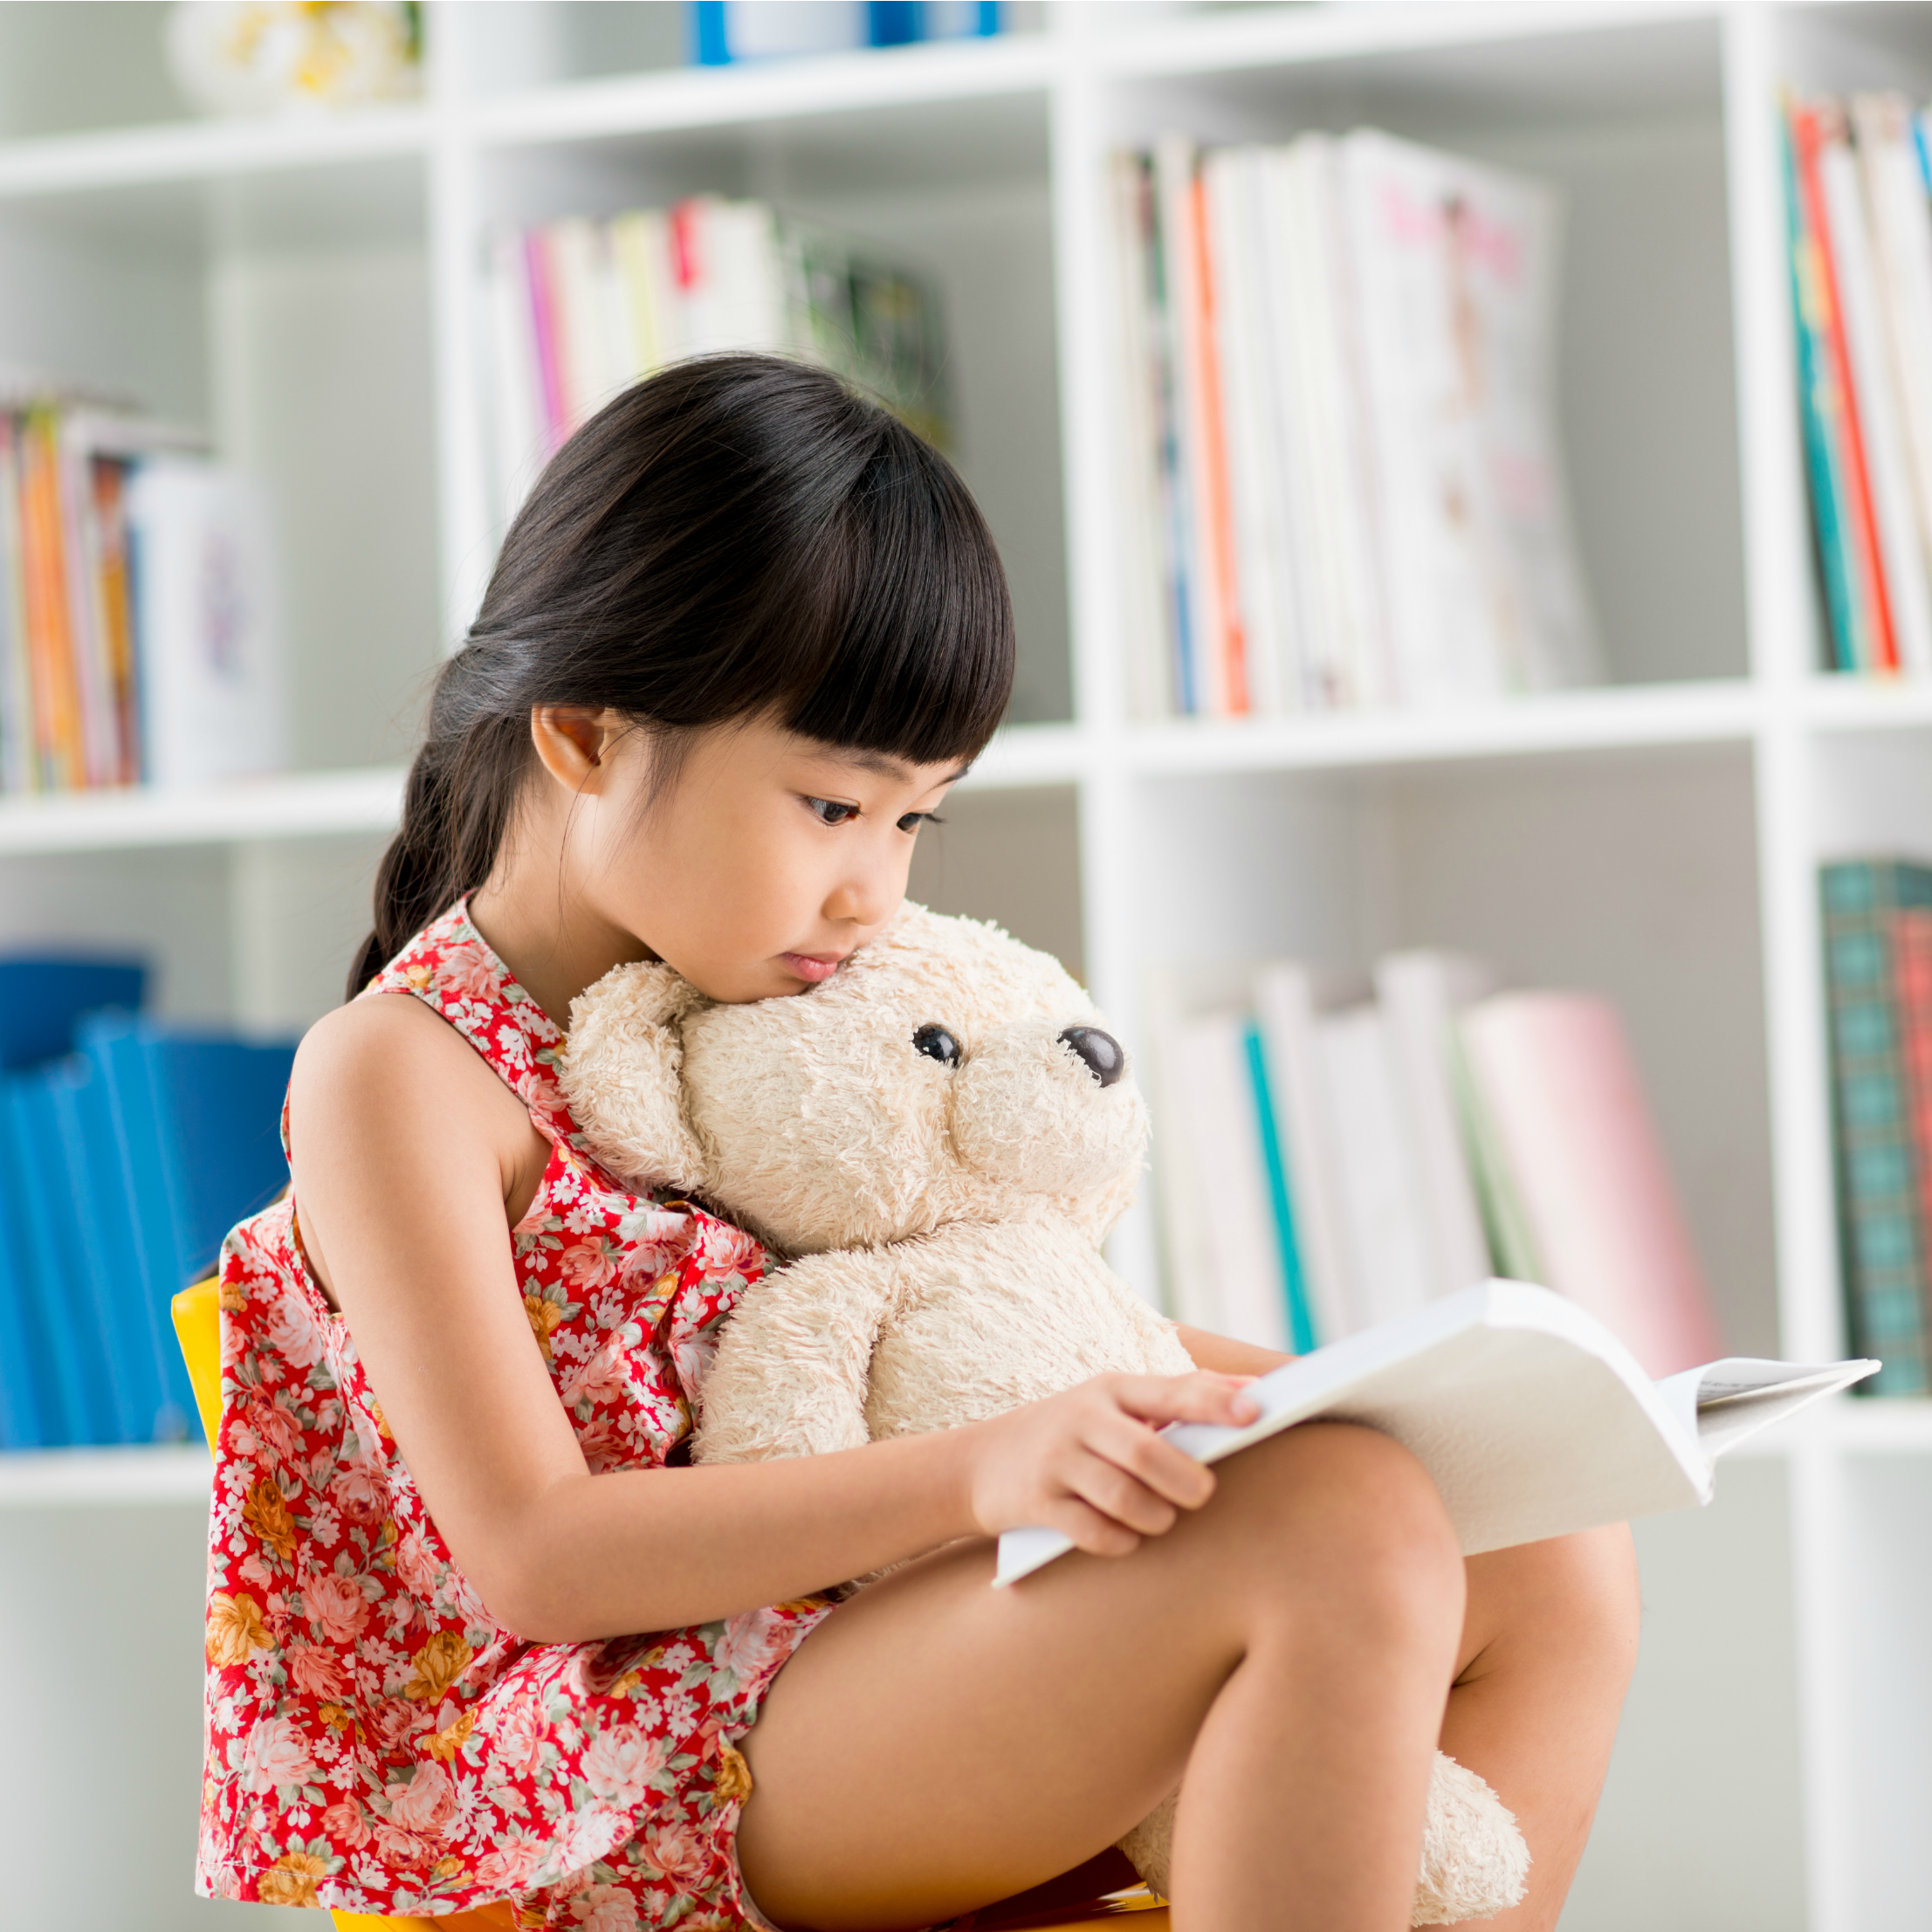 7 Fun Ways to Foster a Love of Reading in Your Preschooler